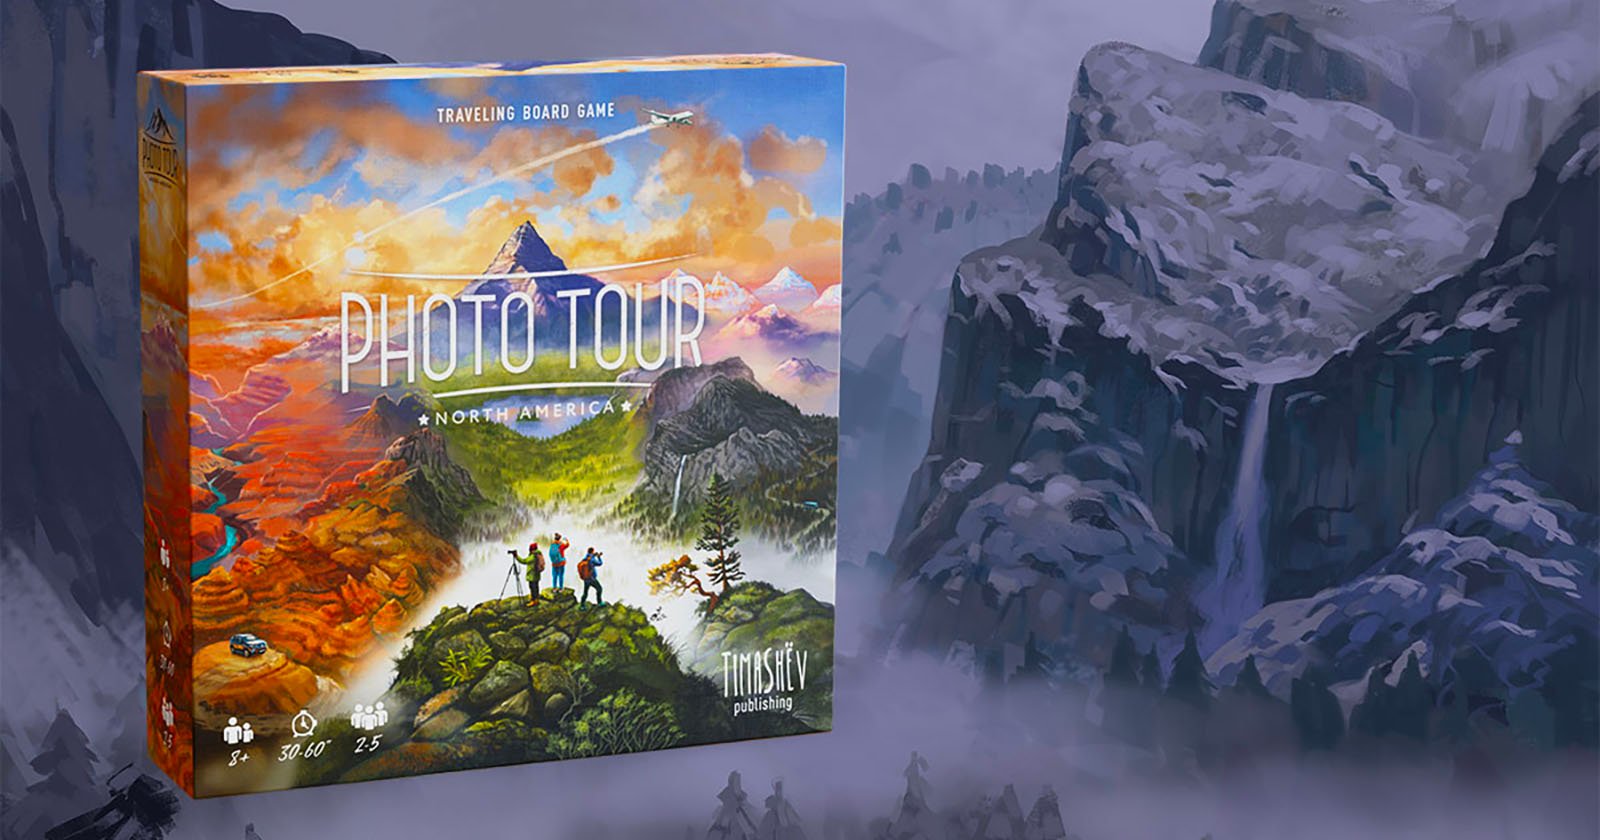  photo tour upcoming travel photography-themed board game 